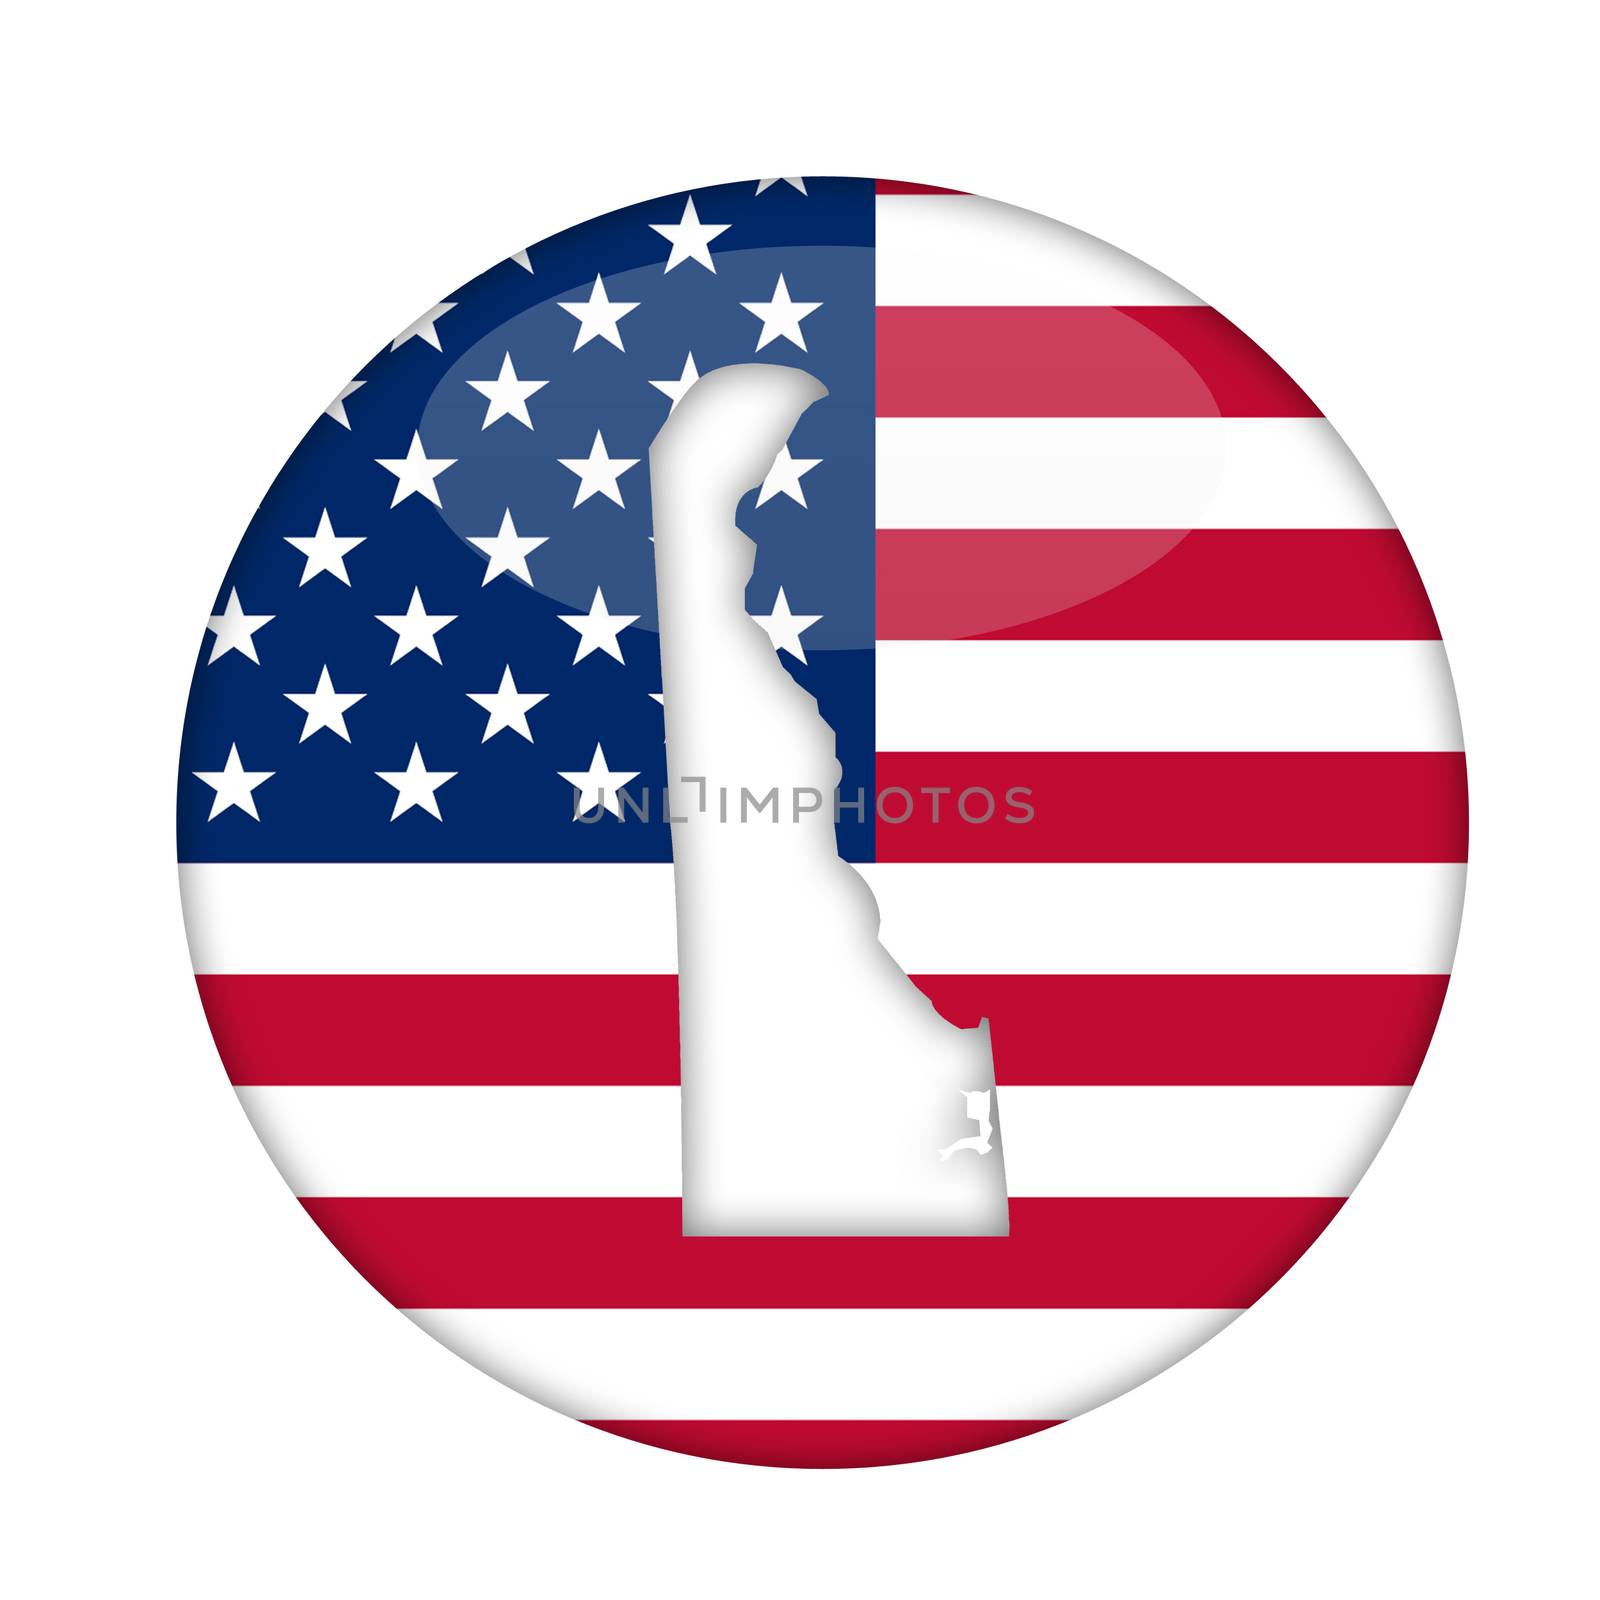 Delaware state of America badge isolated on a white background.